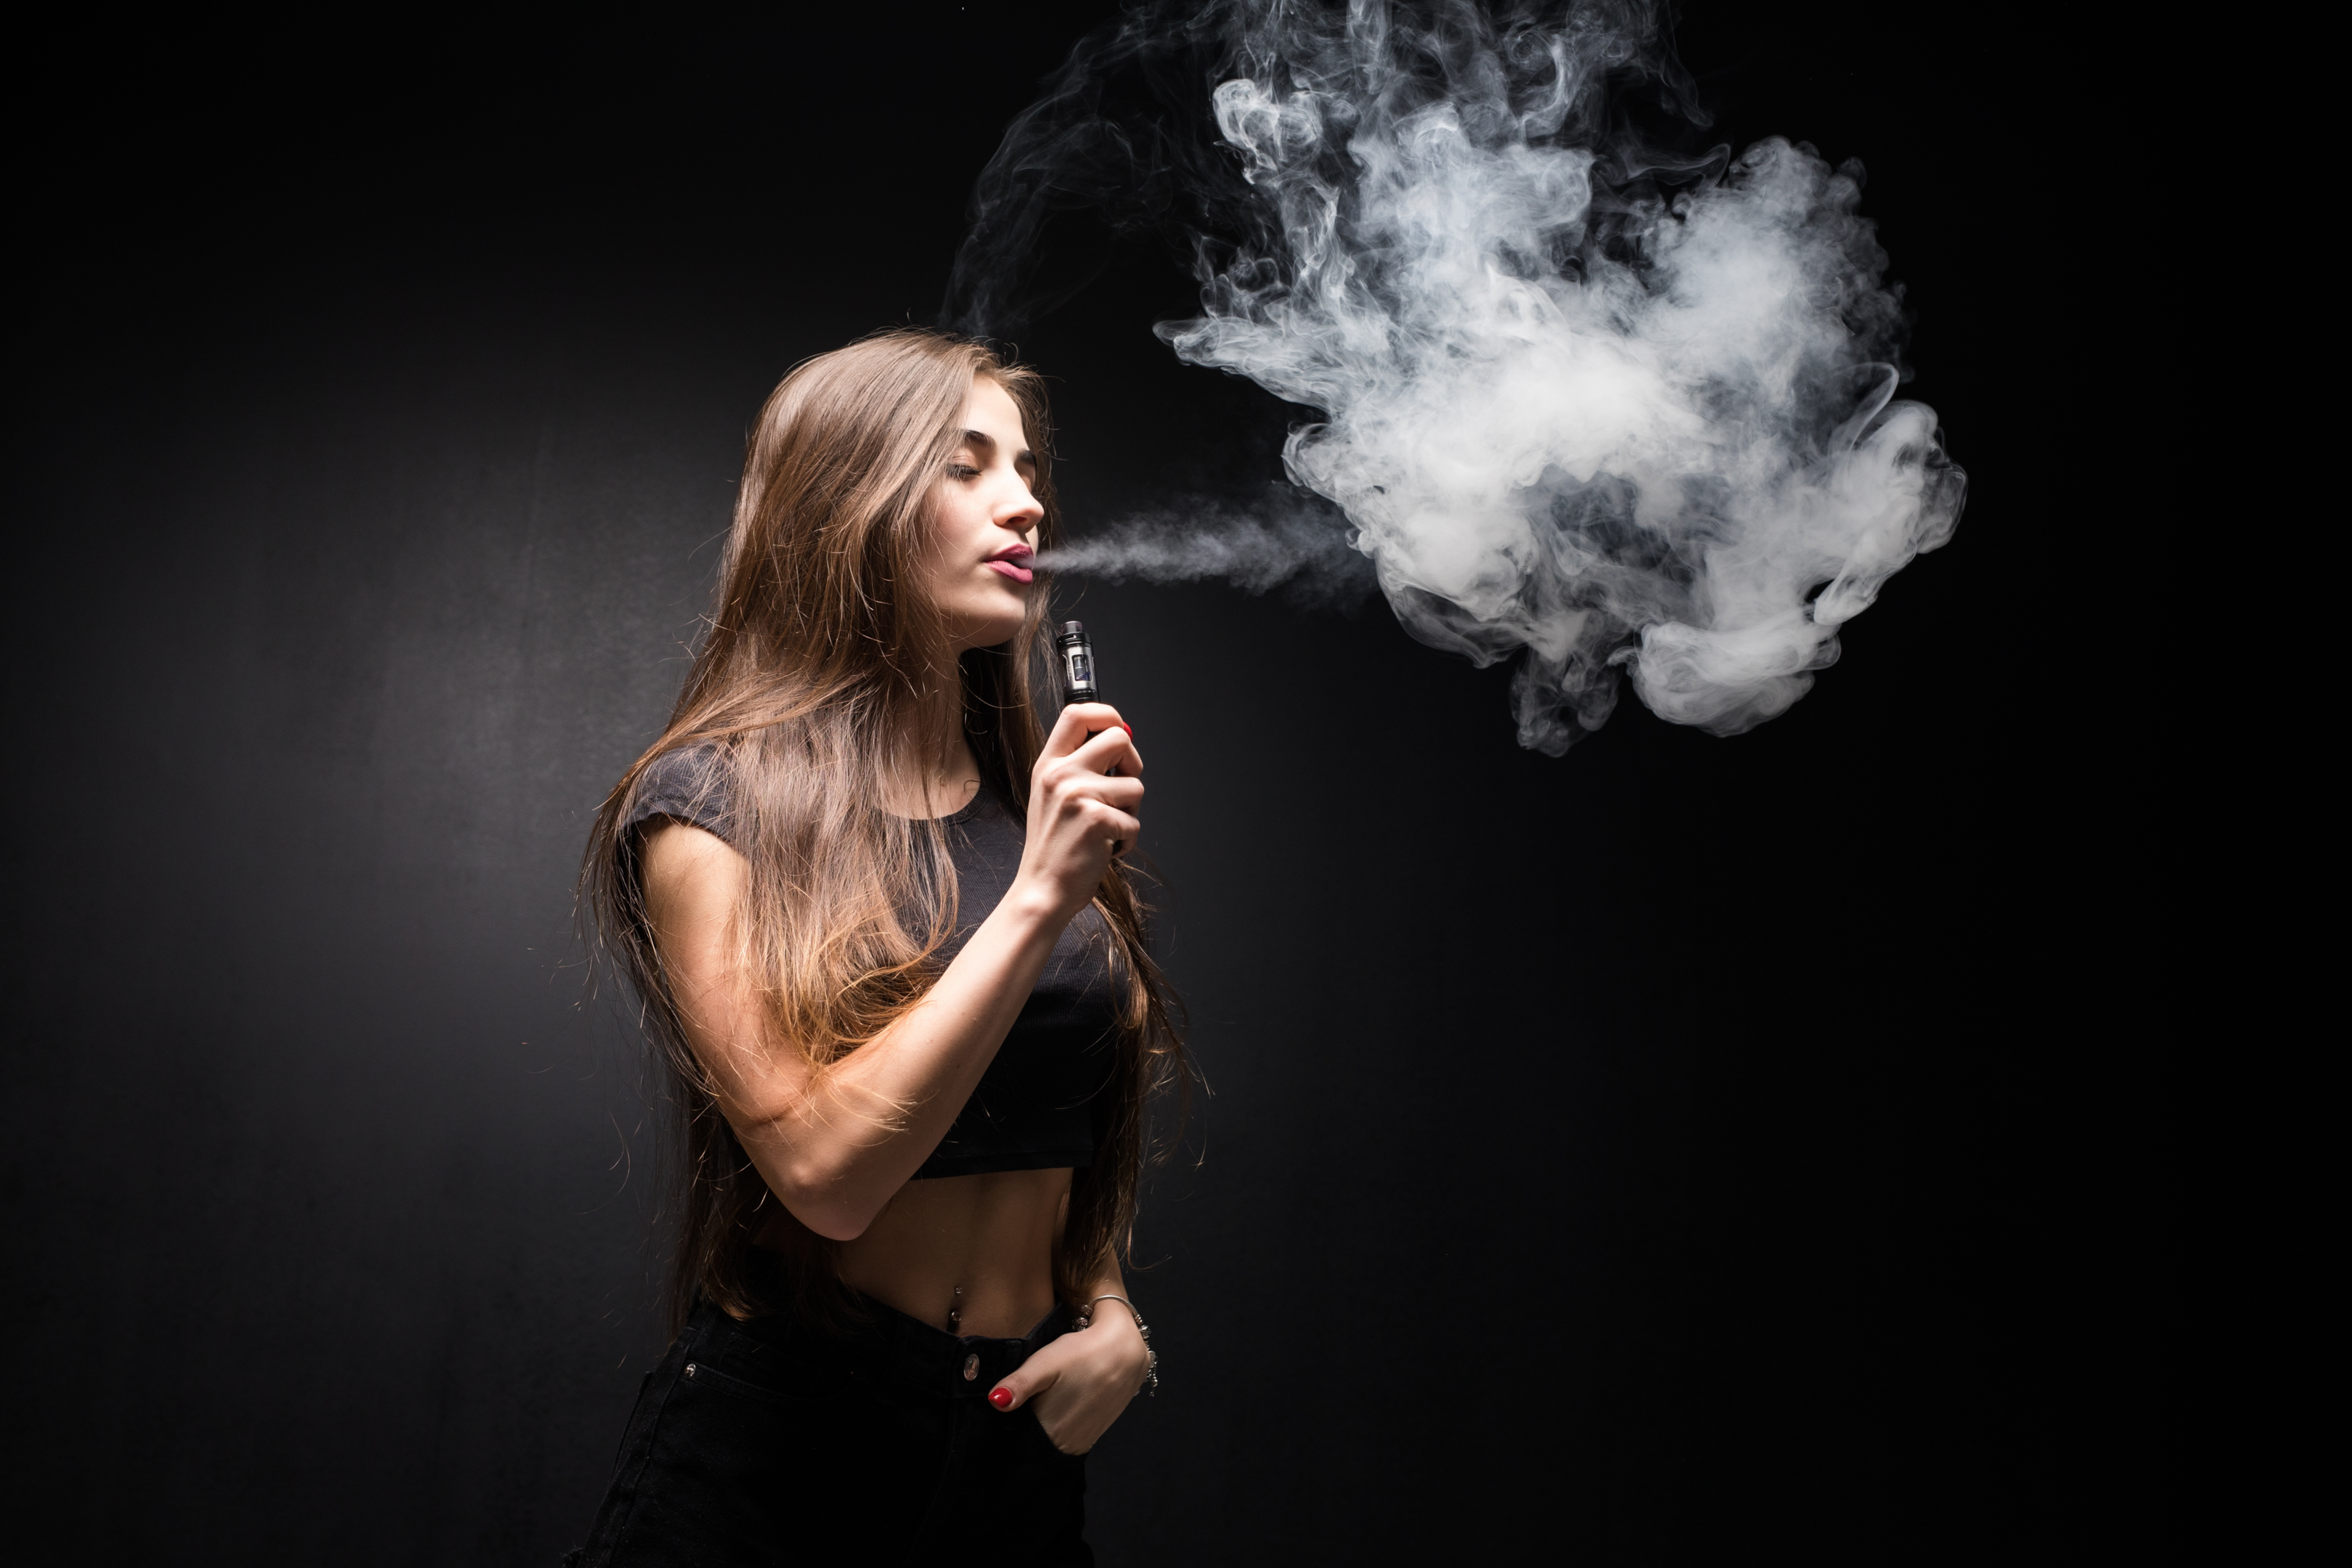 The nicotine-free e-cigarettes allow you to have a big cloud without addiction.